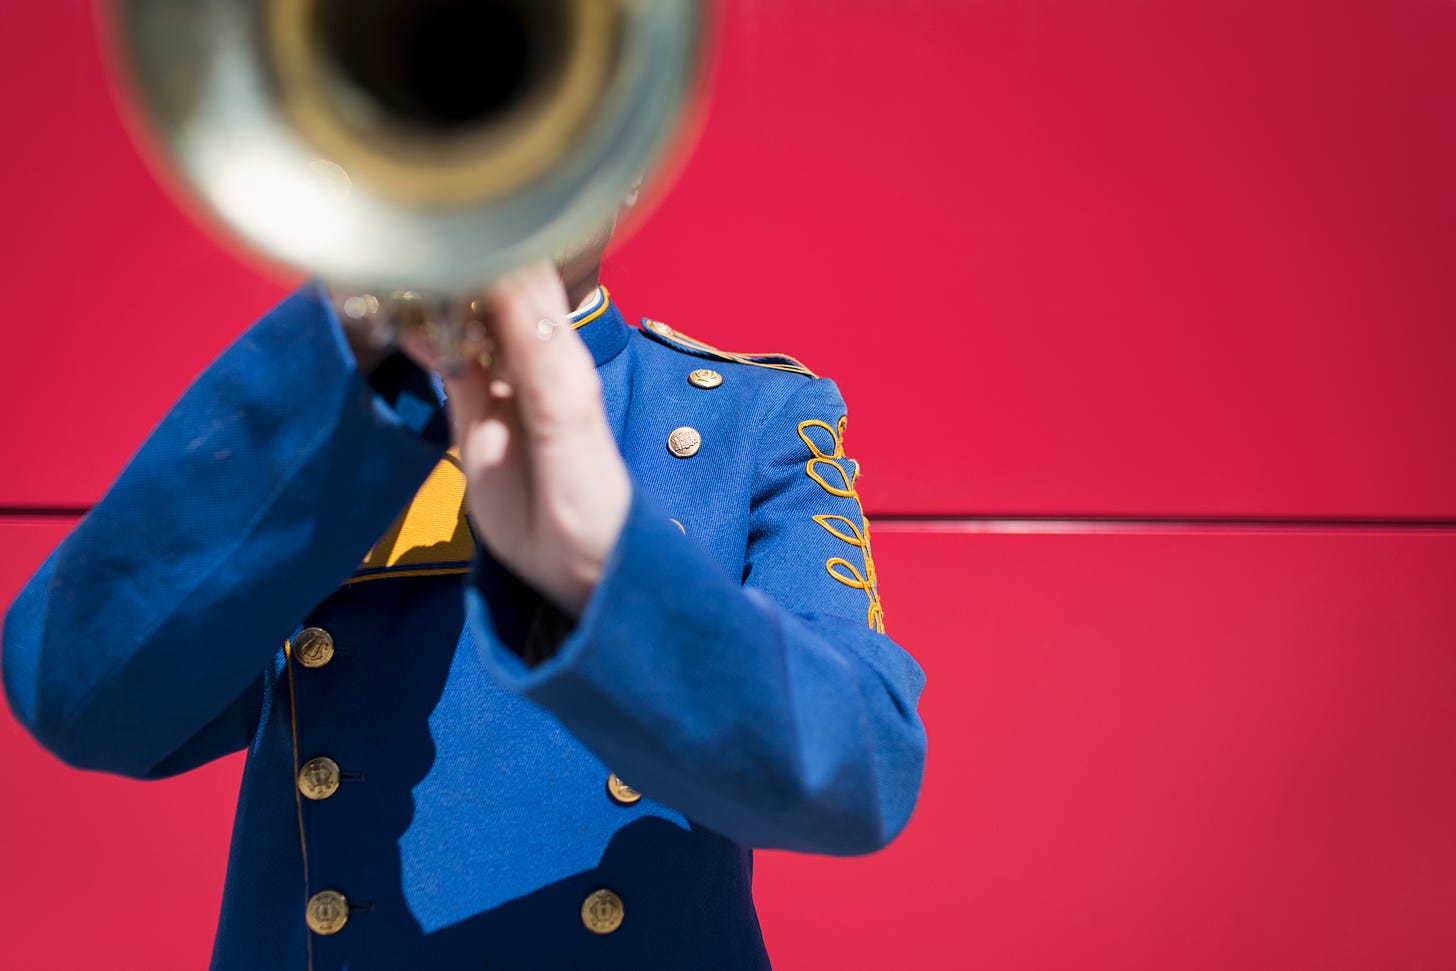 Trumpet player in marching band uniform